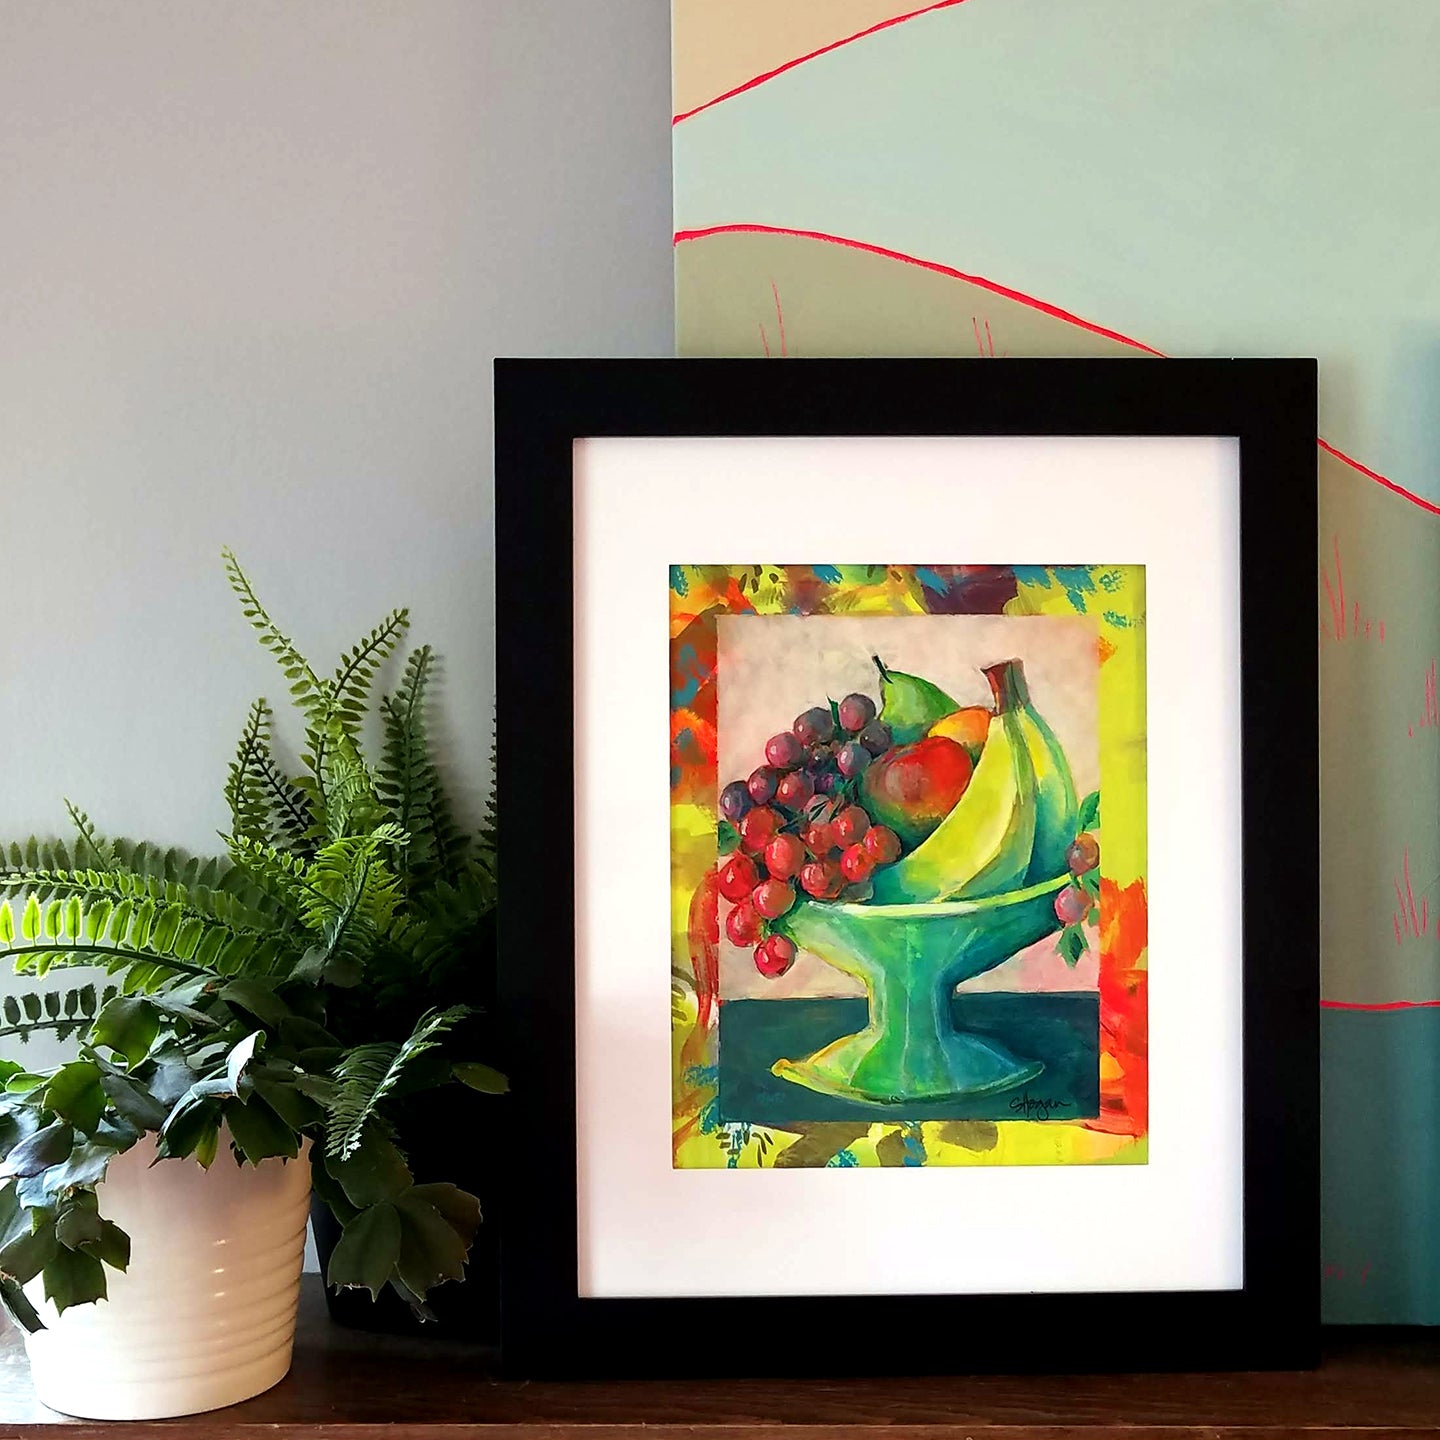 Fresh Fruit - Little Comforts Collection, 2019 by Michigan artist Steph Joy Hogan.  Size: 10" x 8", Matted 11" x 14"  Media: Acrylic, Ink. Ask about framing options.